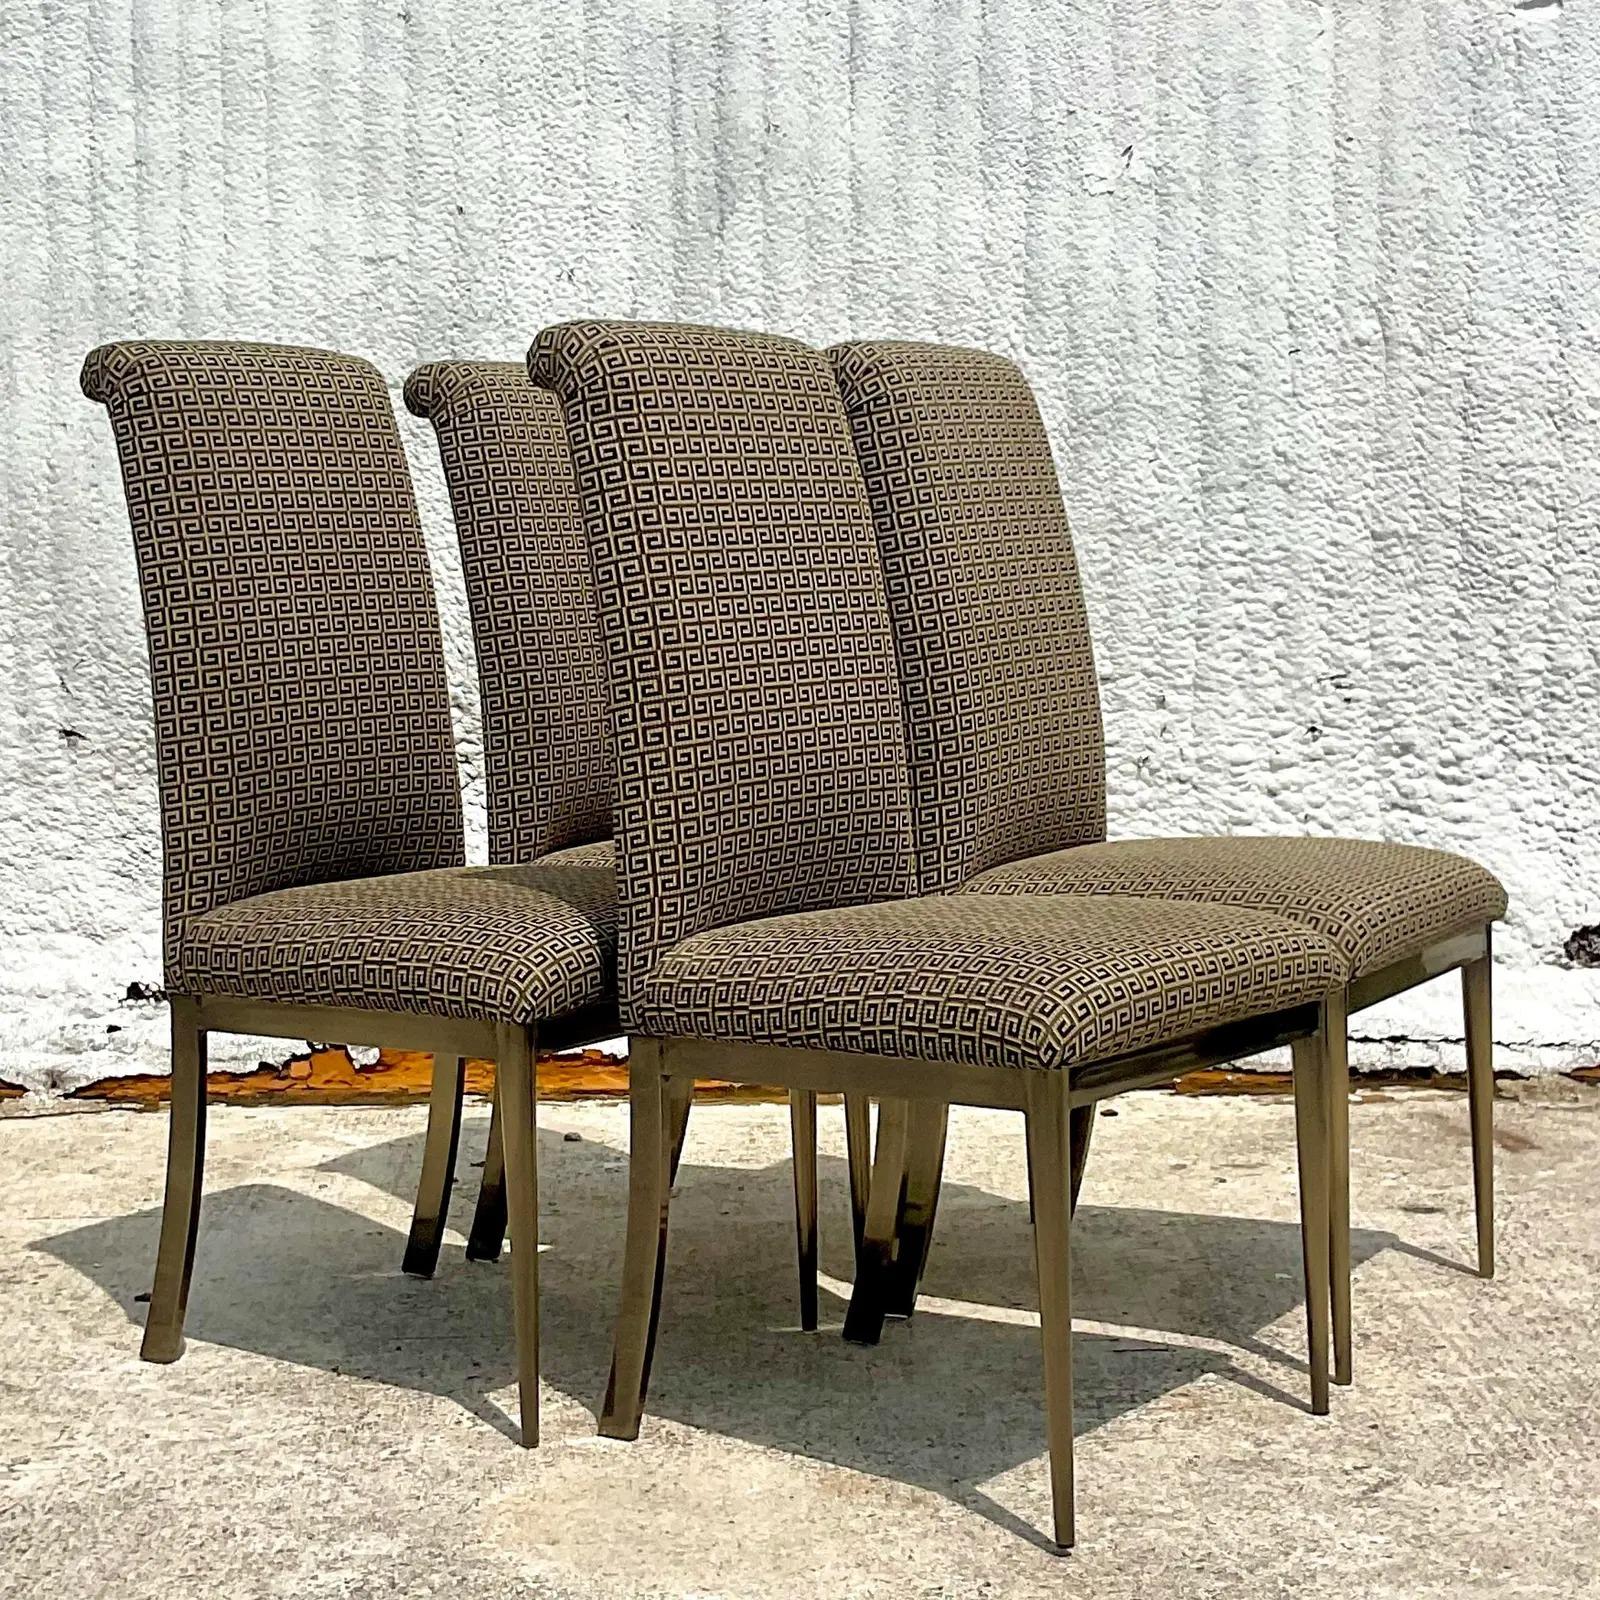 20th Century Vintage Contemporary Dia Burnished Brass Dining Chairs - Set of 4 For Sale